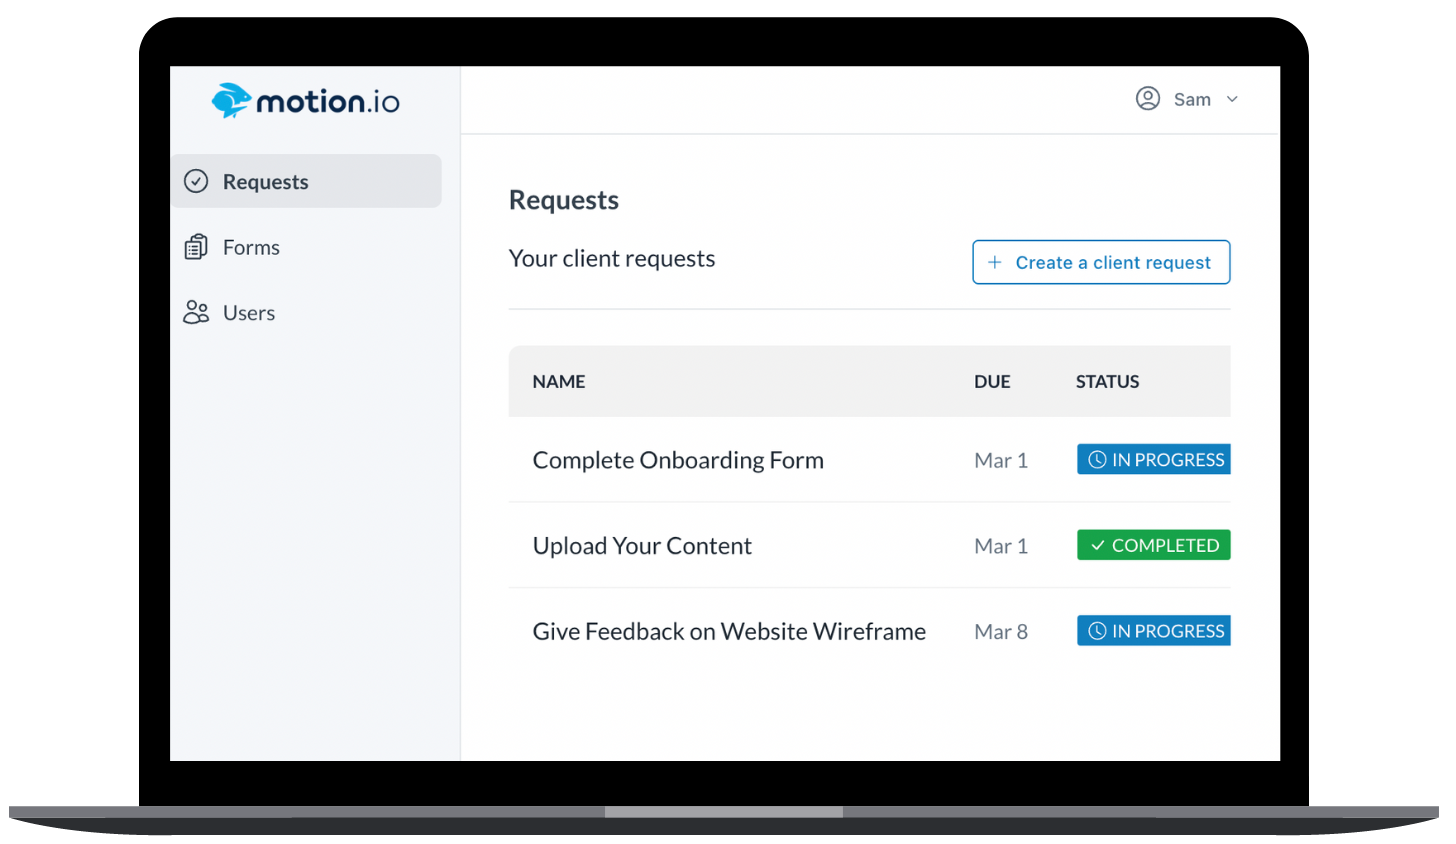 Picture of Motion.io's client request dashboard showing client requests to provide feedback, submit an onboarding form, and provide content